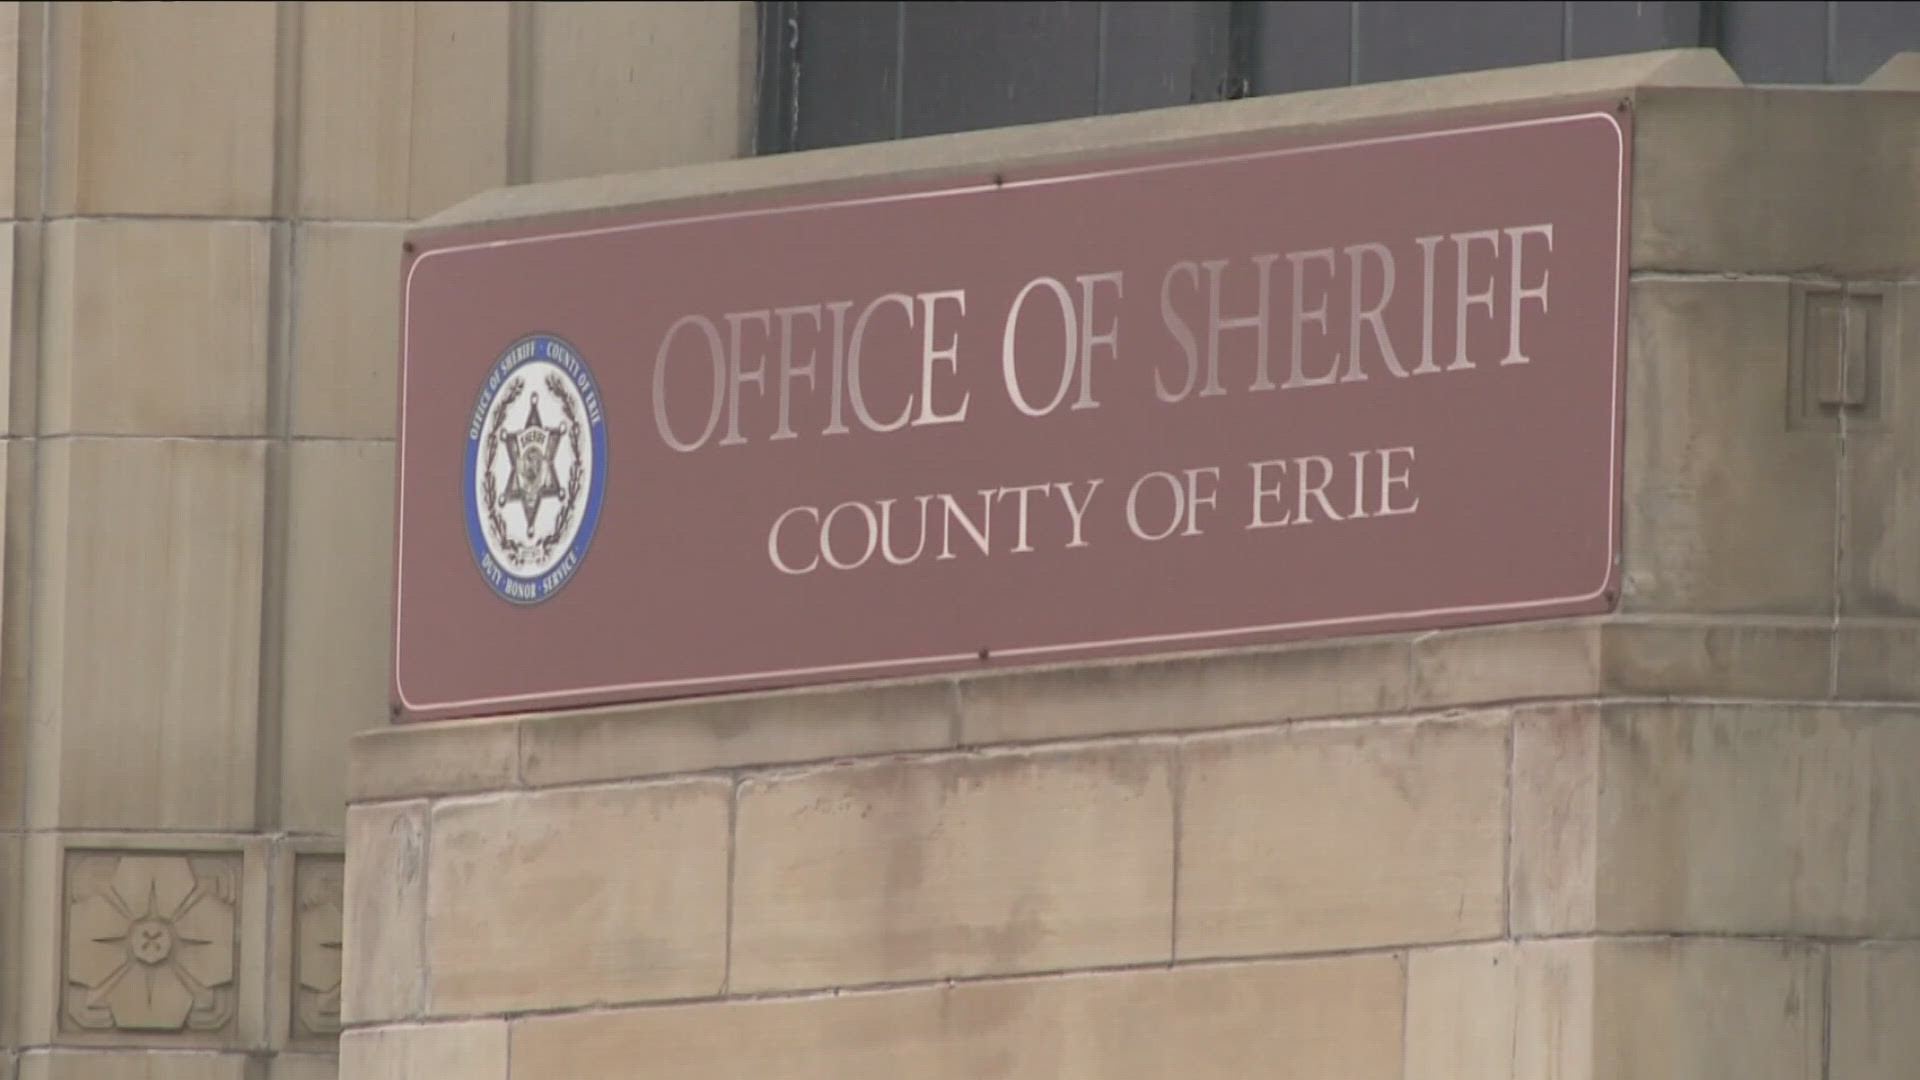 Look out for scam callers pretending to be an employee from the Sheriff's Office.